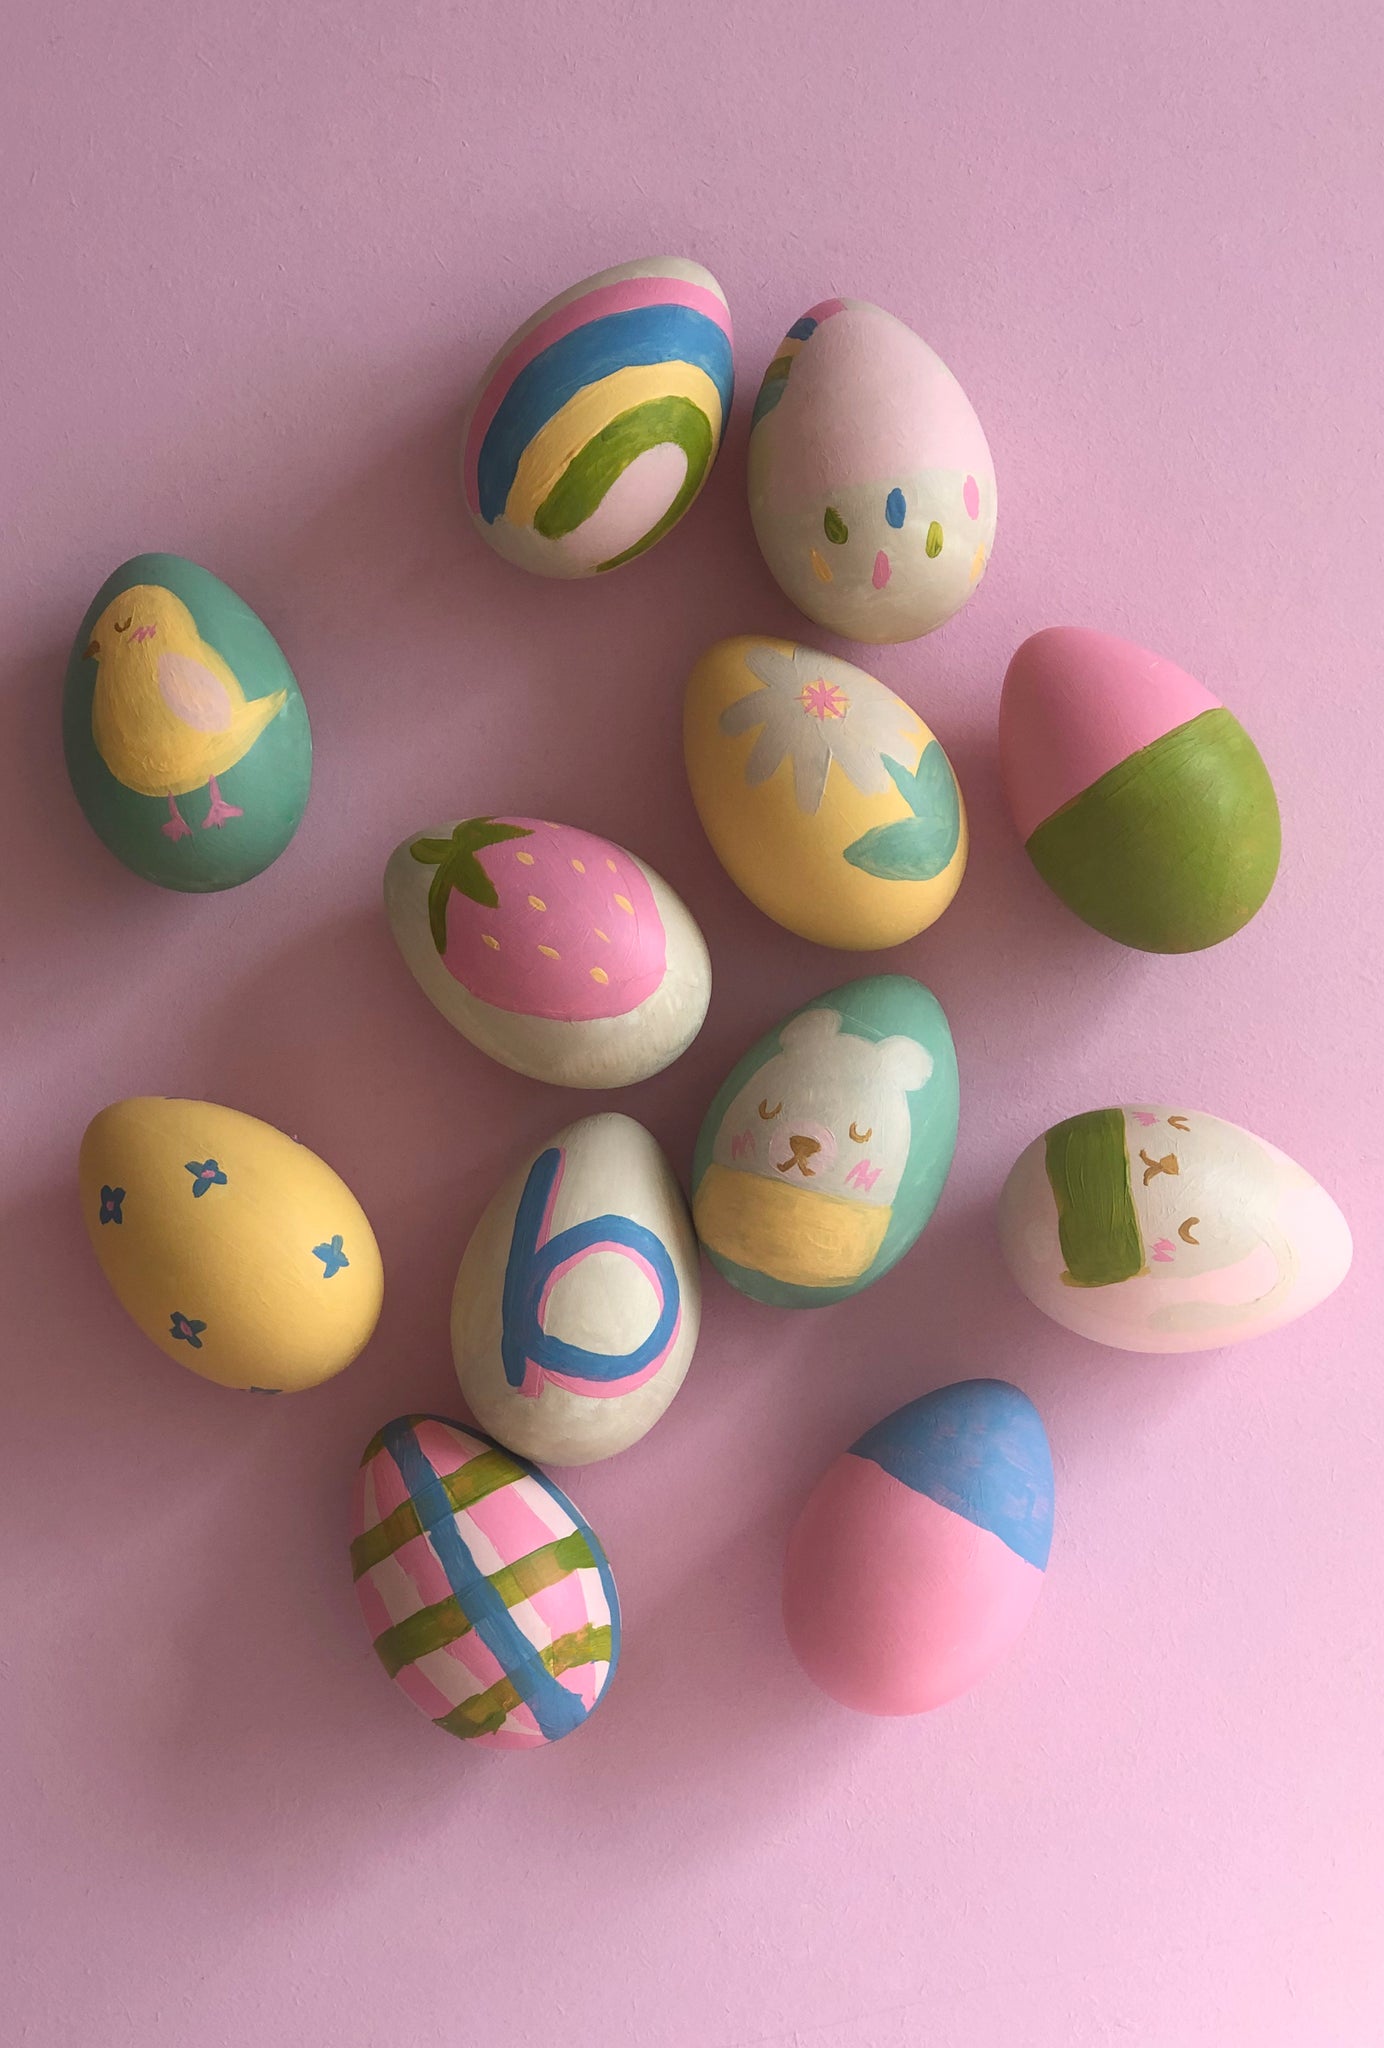 12 individually painted colourful Easter Egg crafts for kids